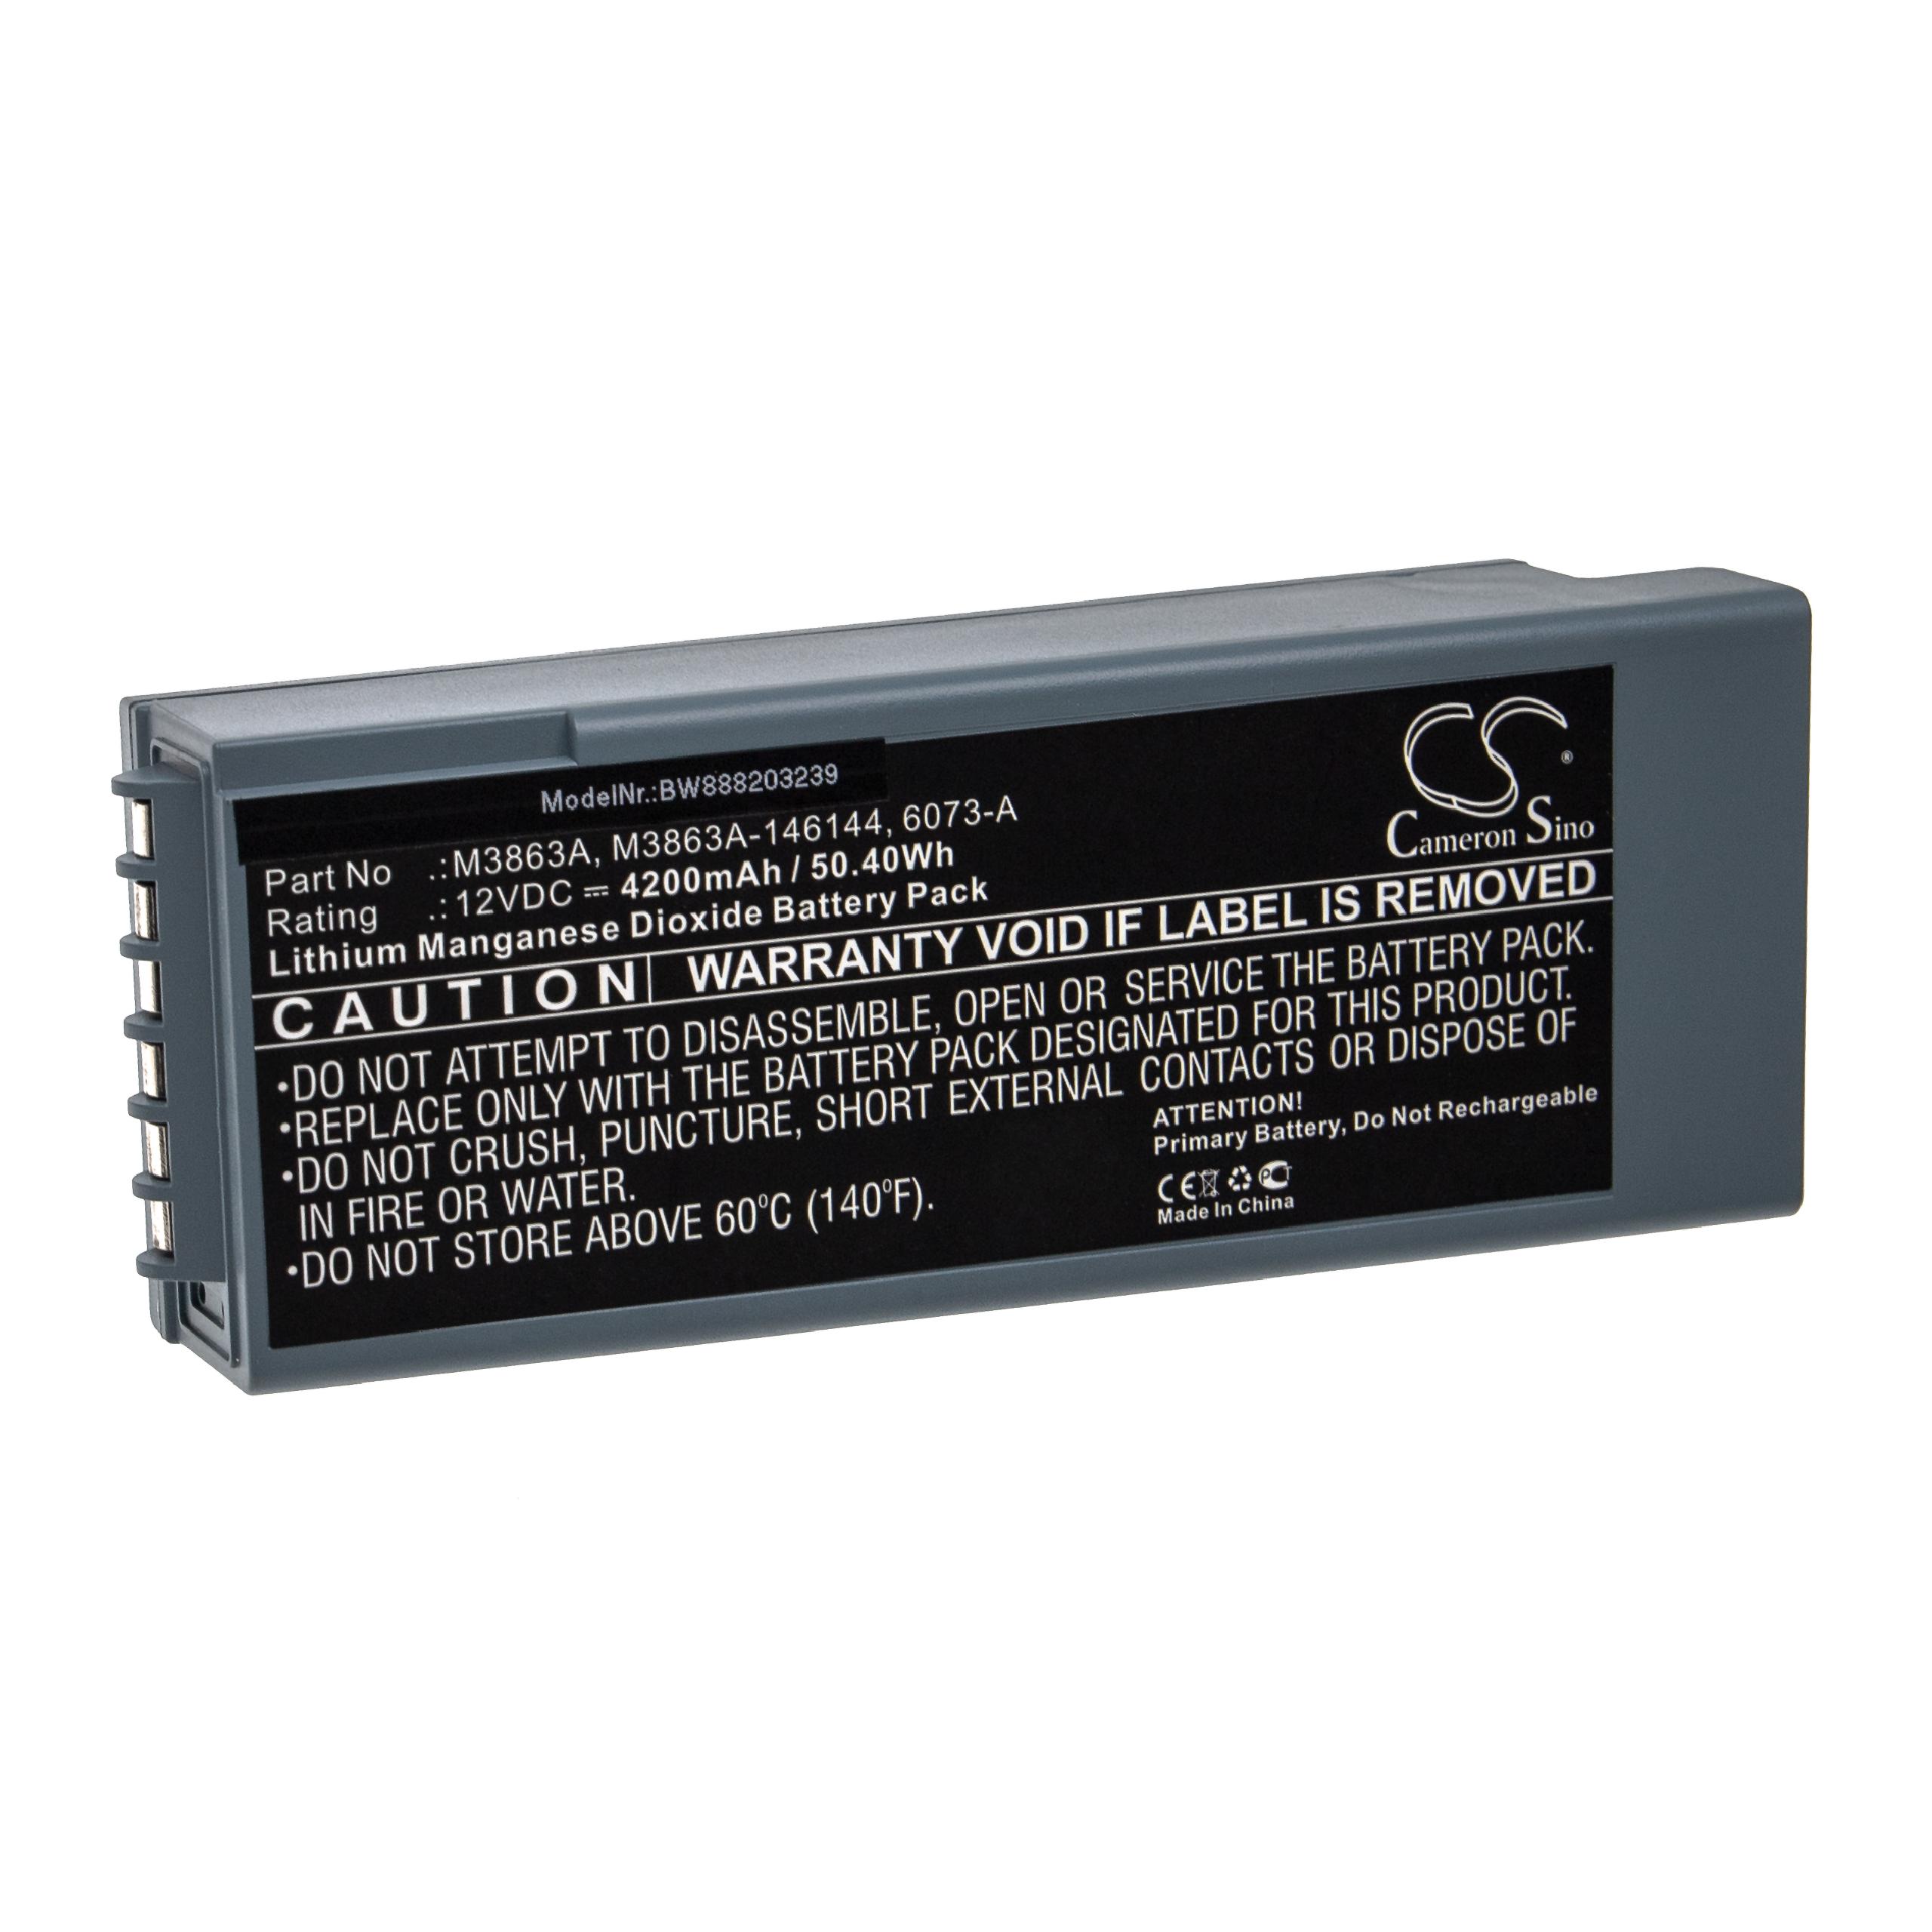 Medical Equipment Battery Replacement for Philips M3848A, M3860A, M3840A, M3841A, 6073-A - 4200mAh 12V Li-MnO2